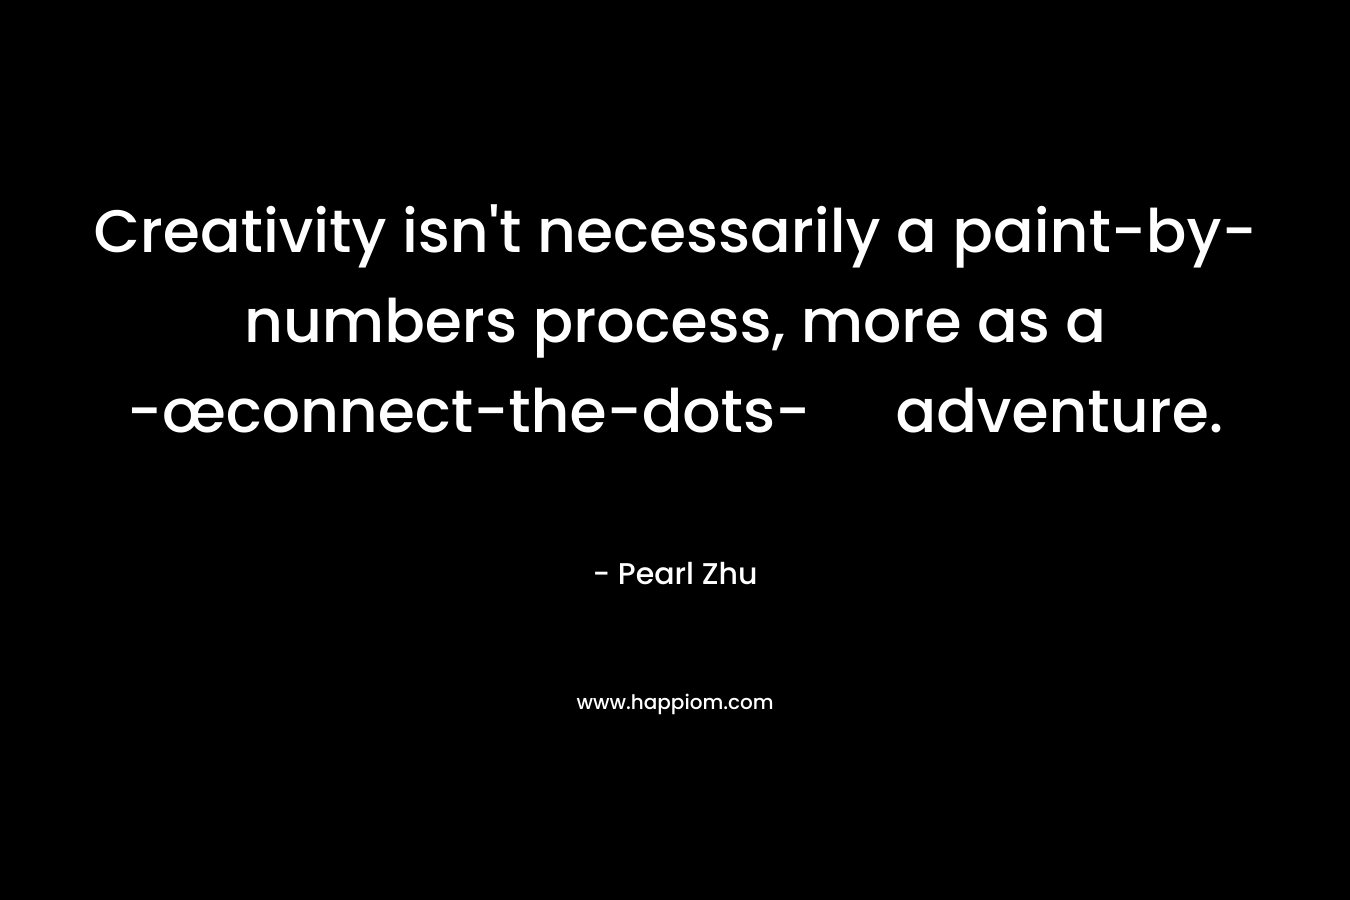 Creativity isn’t necessarily a paint-by-numbers process, more as a -œconnect-the-dots- adventure. – Pearl Zhu